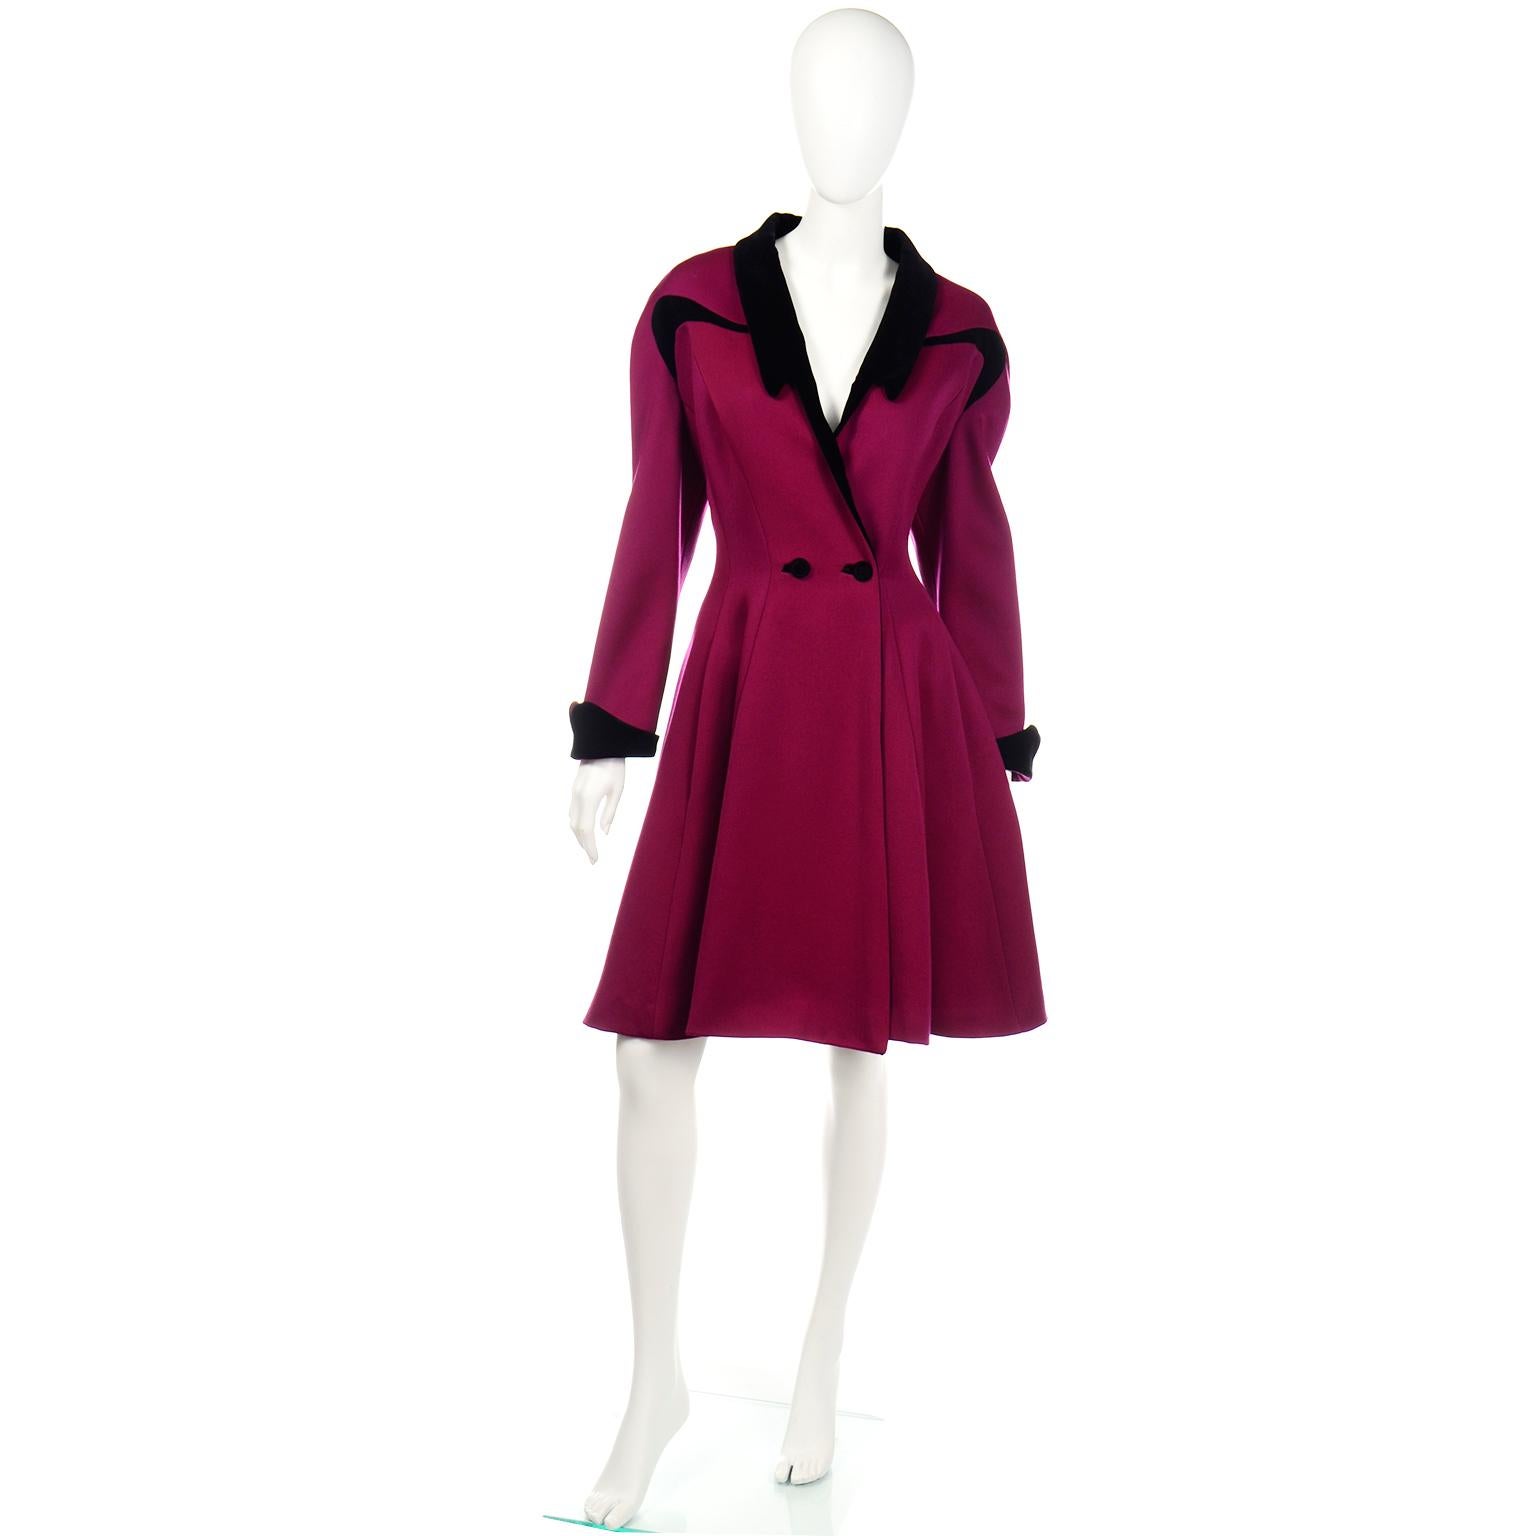 This vintage magenta Thierry Mugler coat is one of our favorites!  We love the way it moves and the flattering princess style silhouette. The rich shade of magenta fabric is a wool and angora blend.  The coat is trimmed in black cotton velvet with